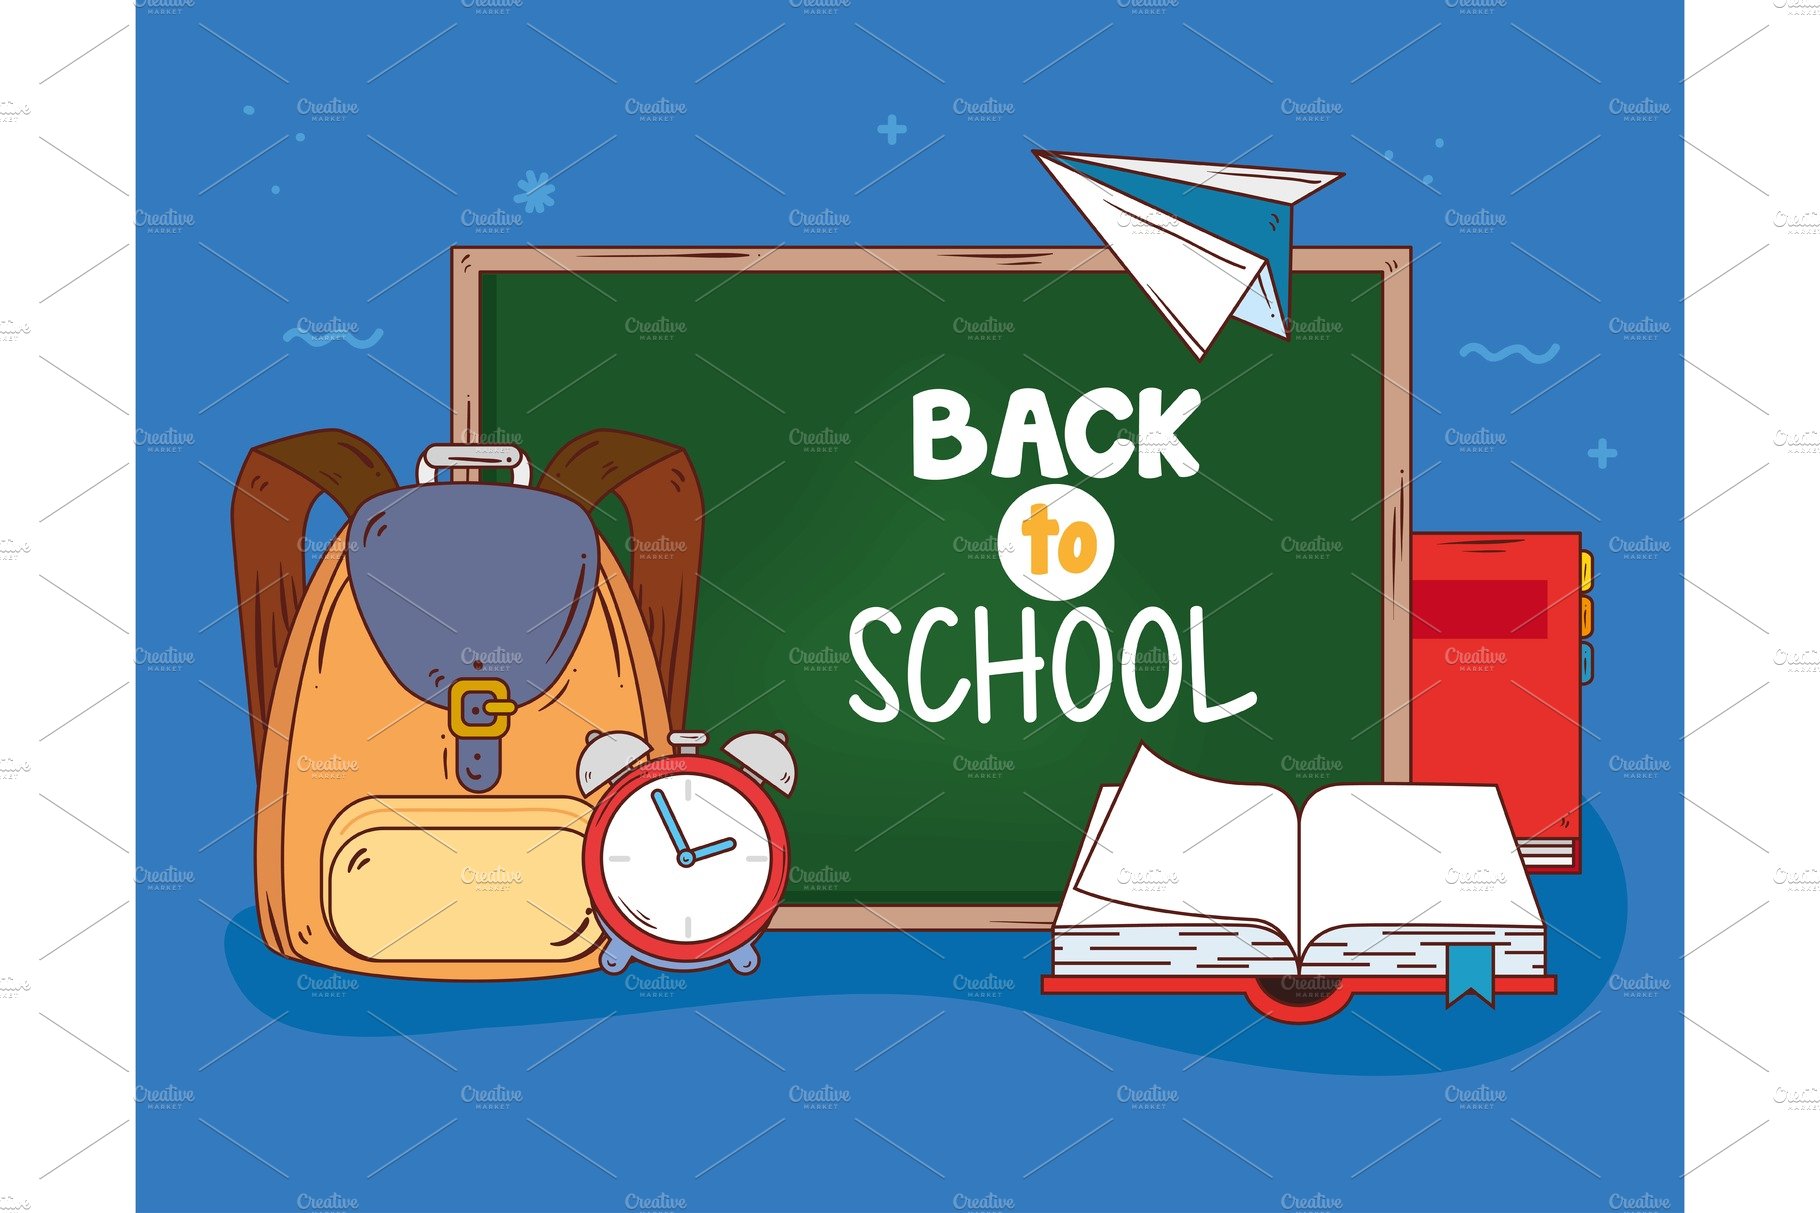 back to school banner with cover image.